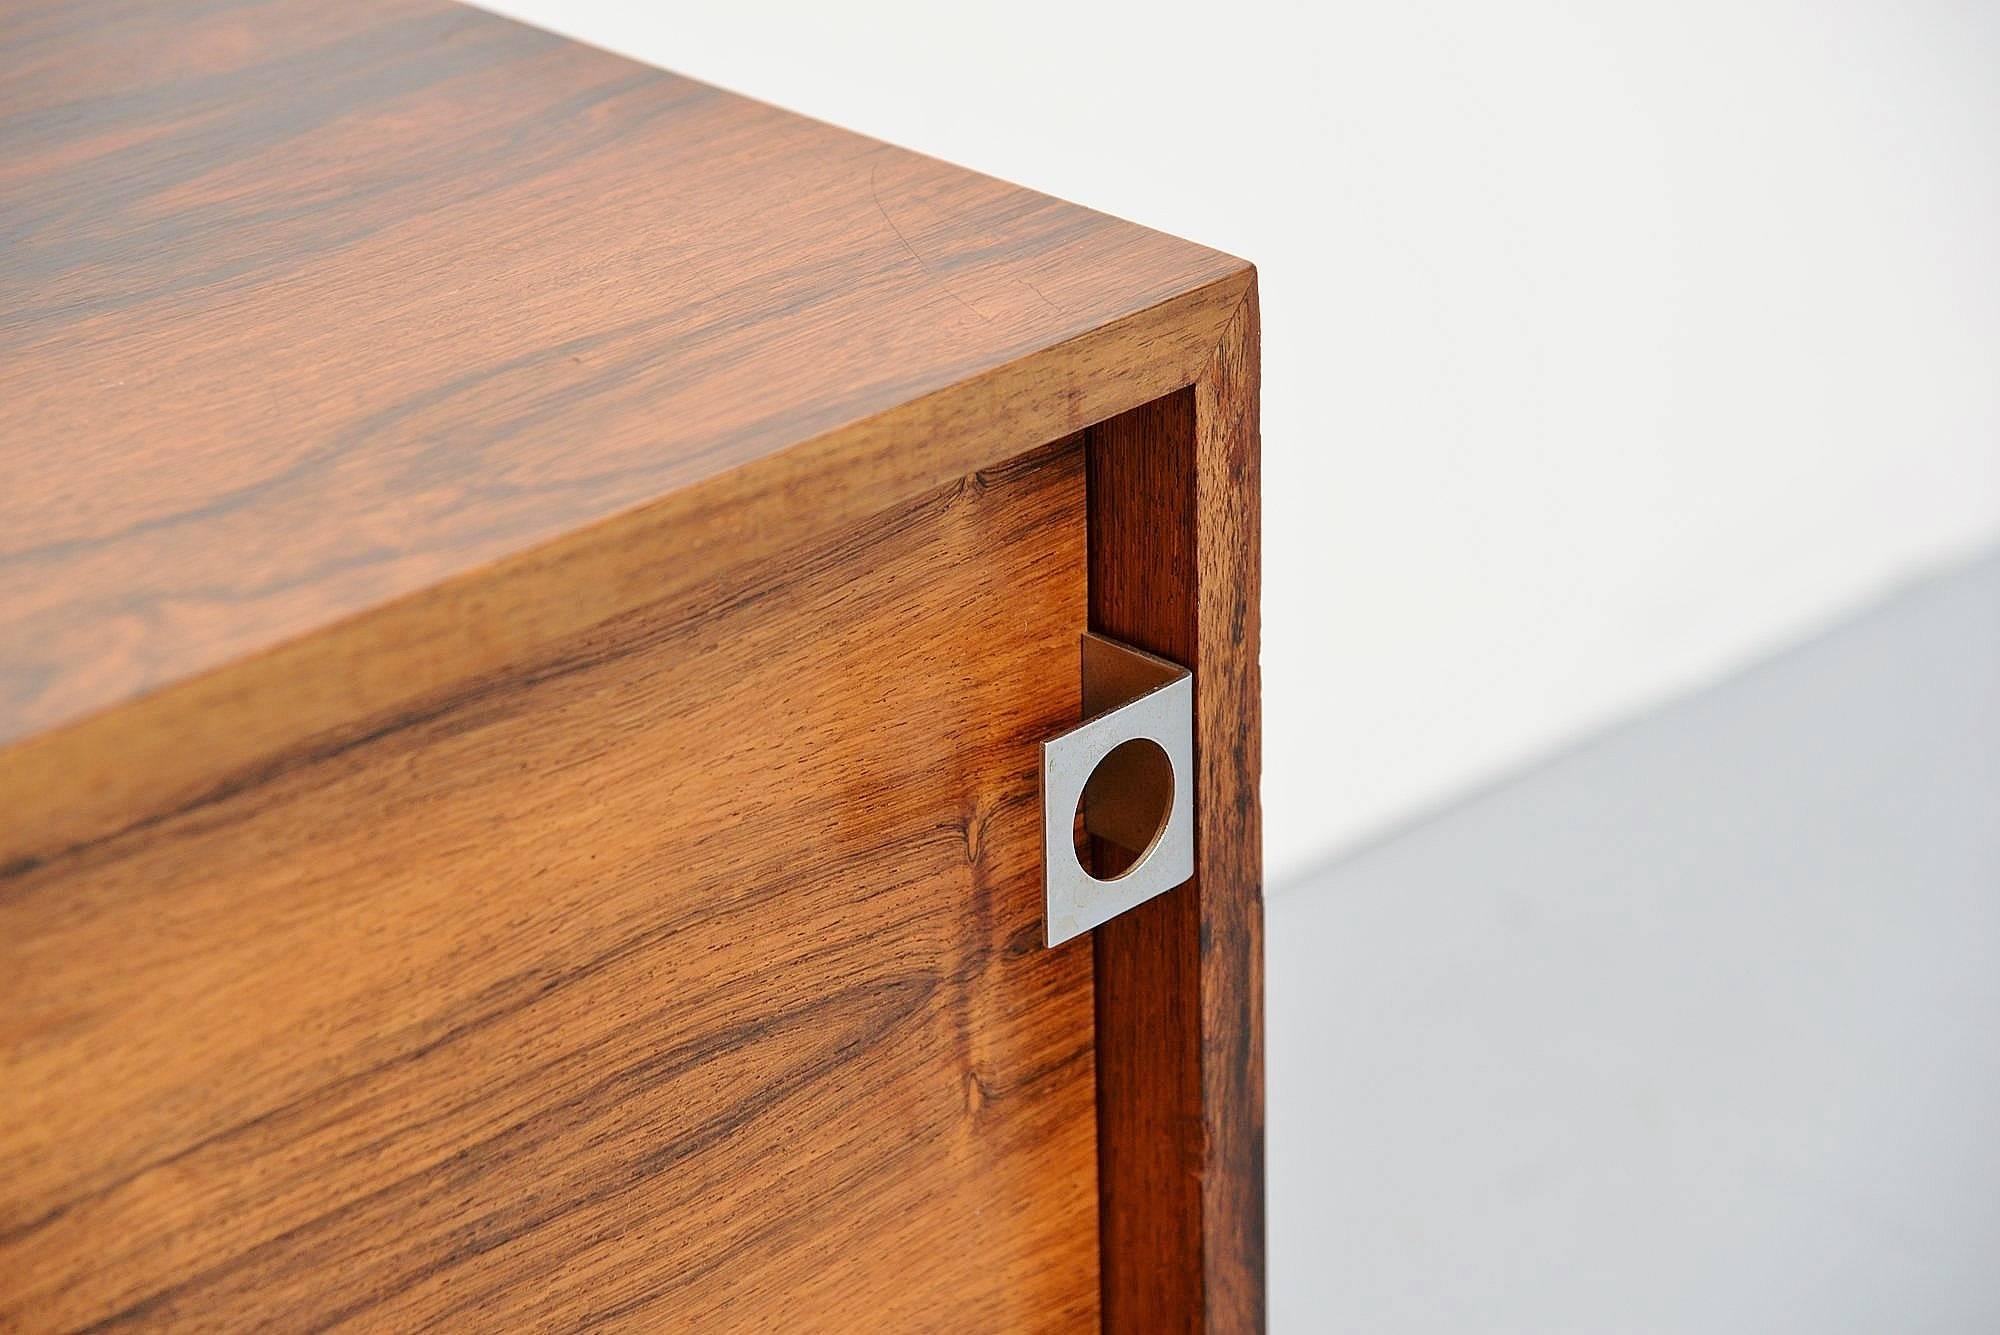 Rare small storage cabinet on wheels designed by Bodil Kjaer, manufactured by Pedersen & Son, Denmark 1959. This was made of very nice grained rosewood and was finished all-over. Easy to move because of the wheels. This small cabinet an be used with